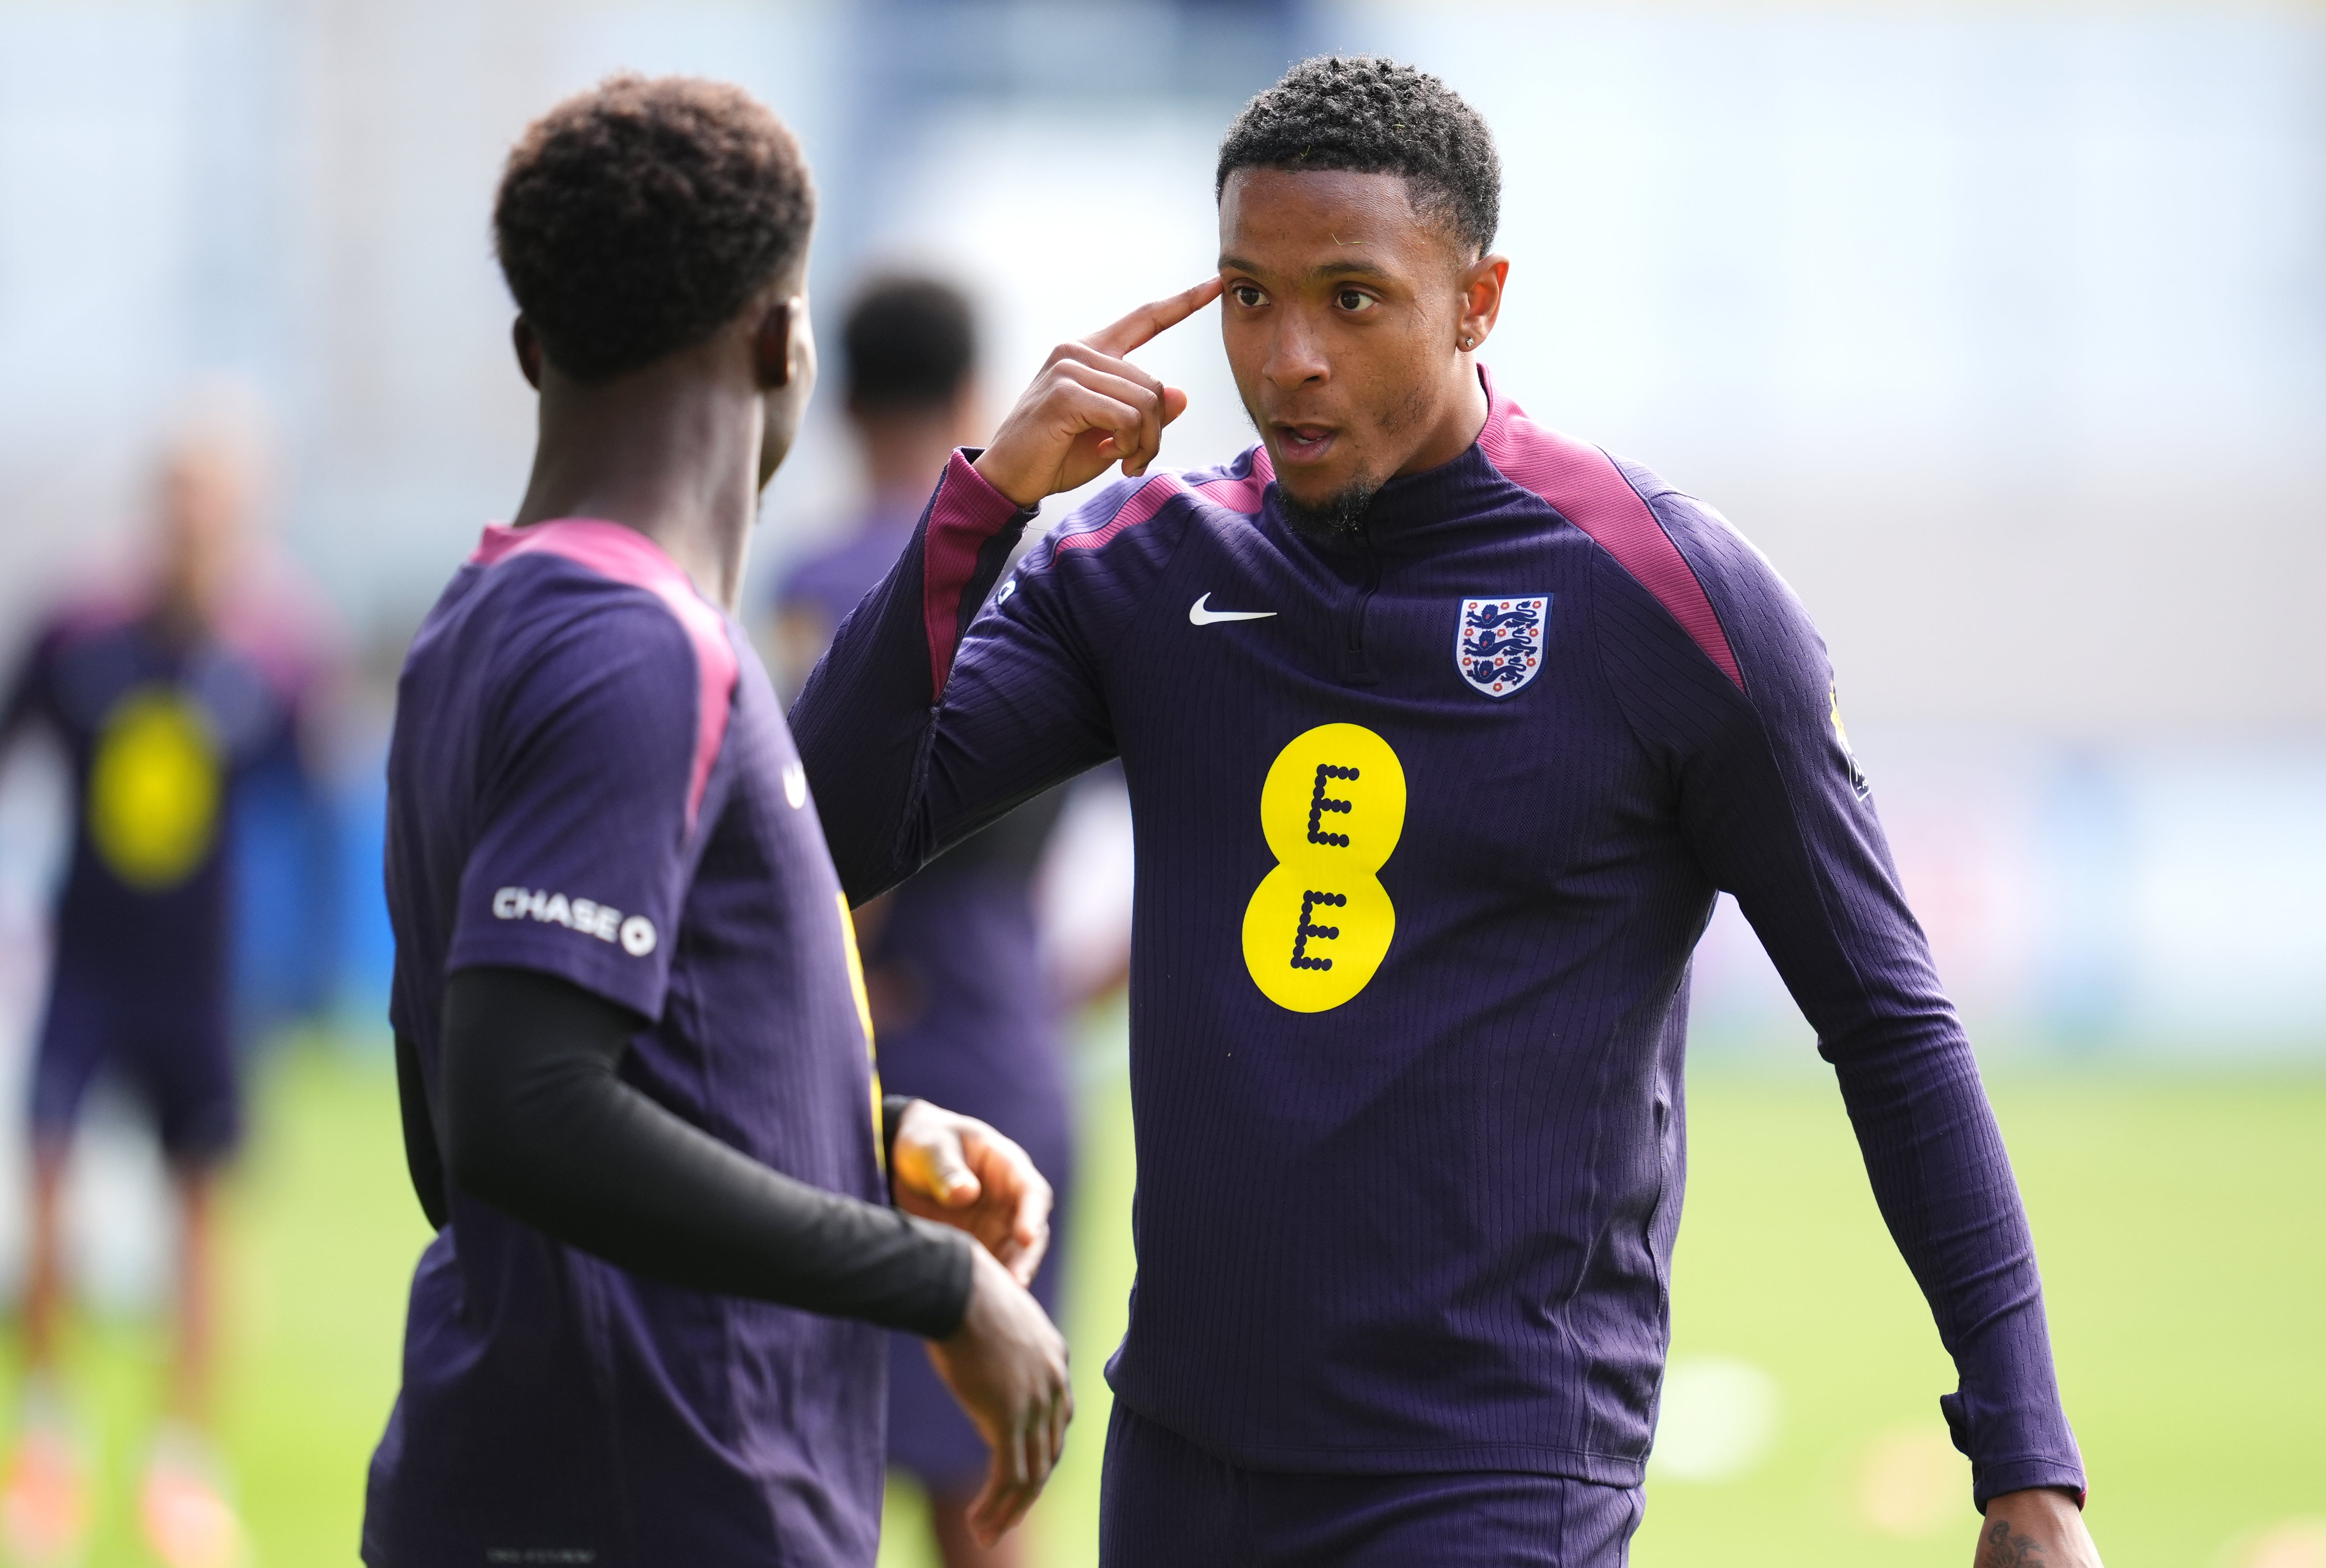 England’s Ezri Konsa, right, speaks to team-mate Bukayo Saka during a training session at the Ernst-Abbe-Sportfeld in Jena (Adam Davy/PA)